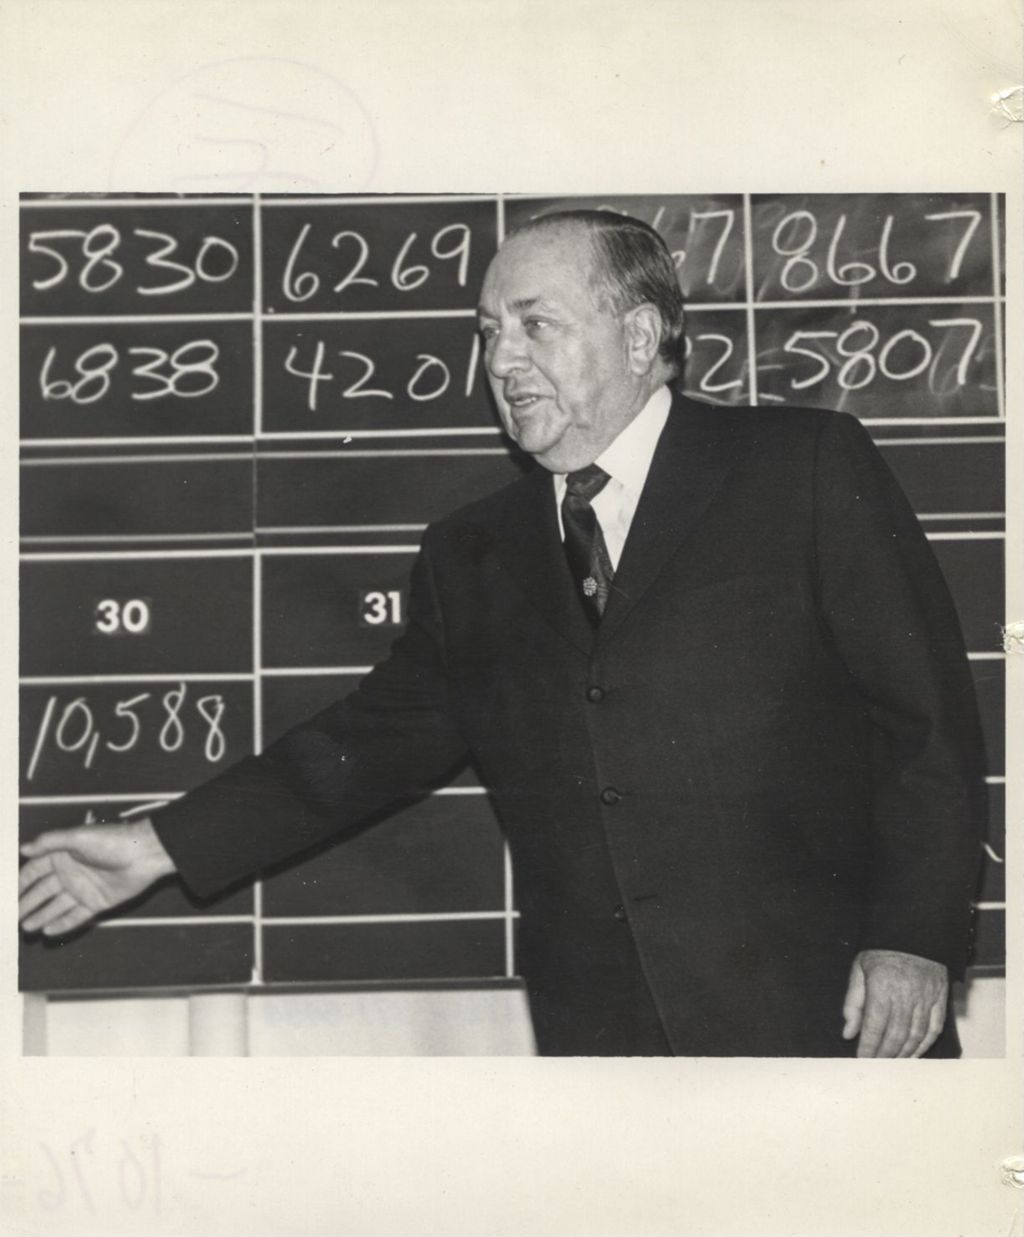 Richard J. Daley in front of a blackboard of election tallies during a "We Care" election event